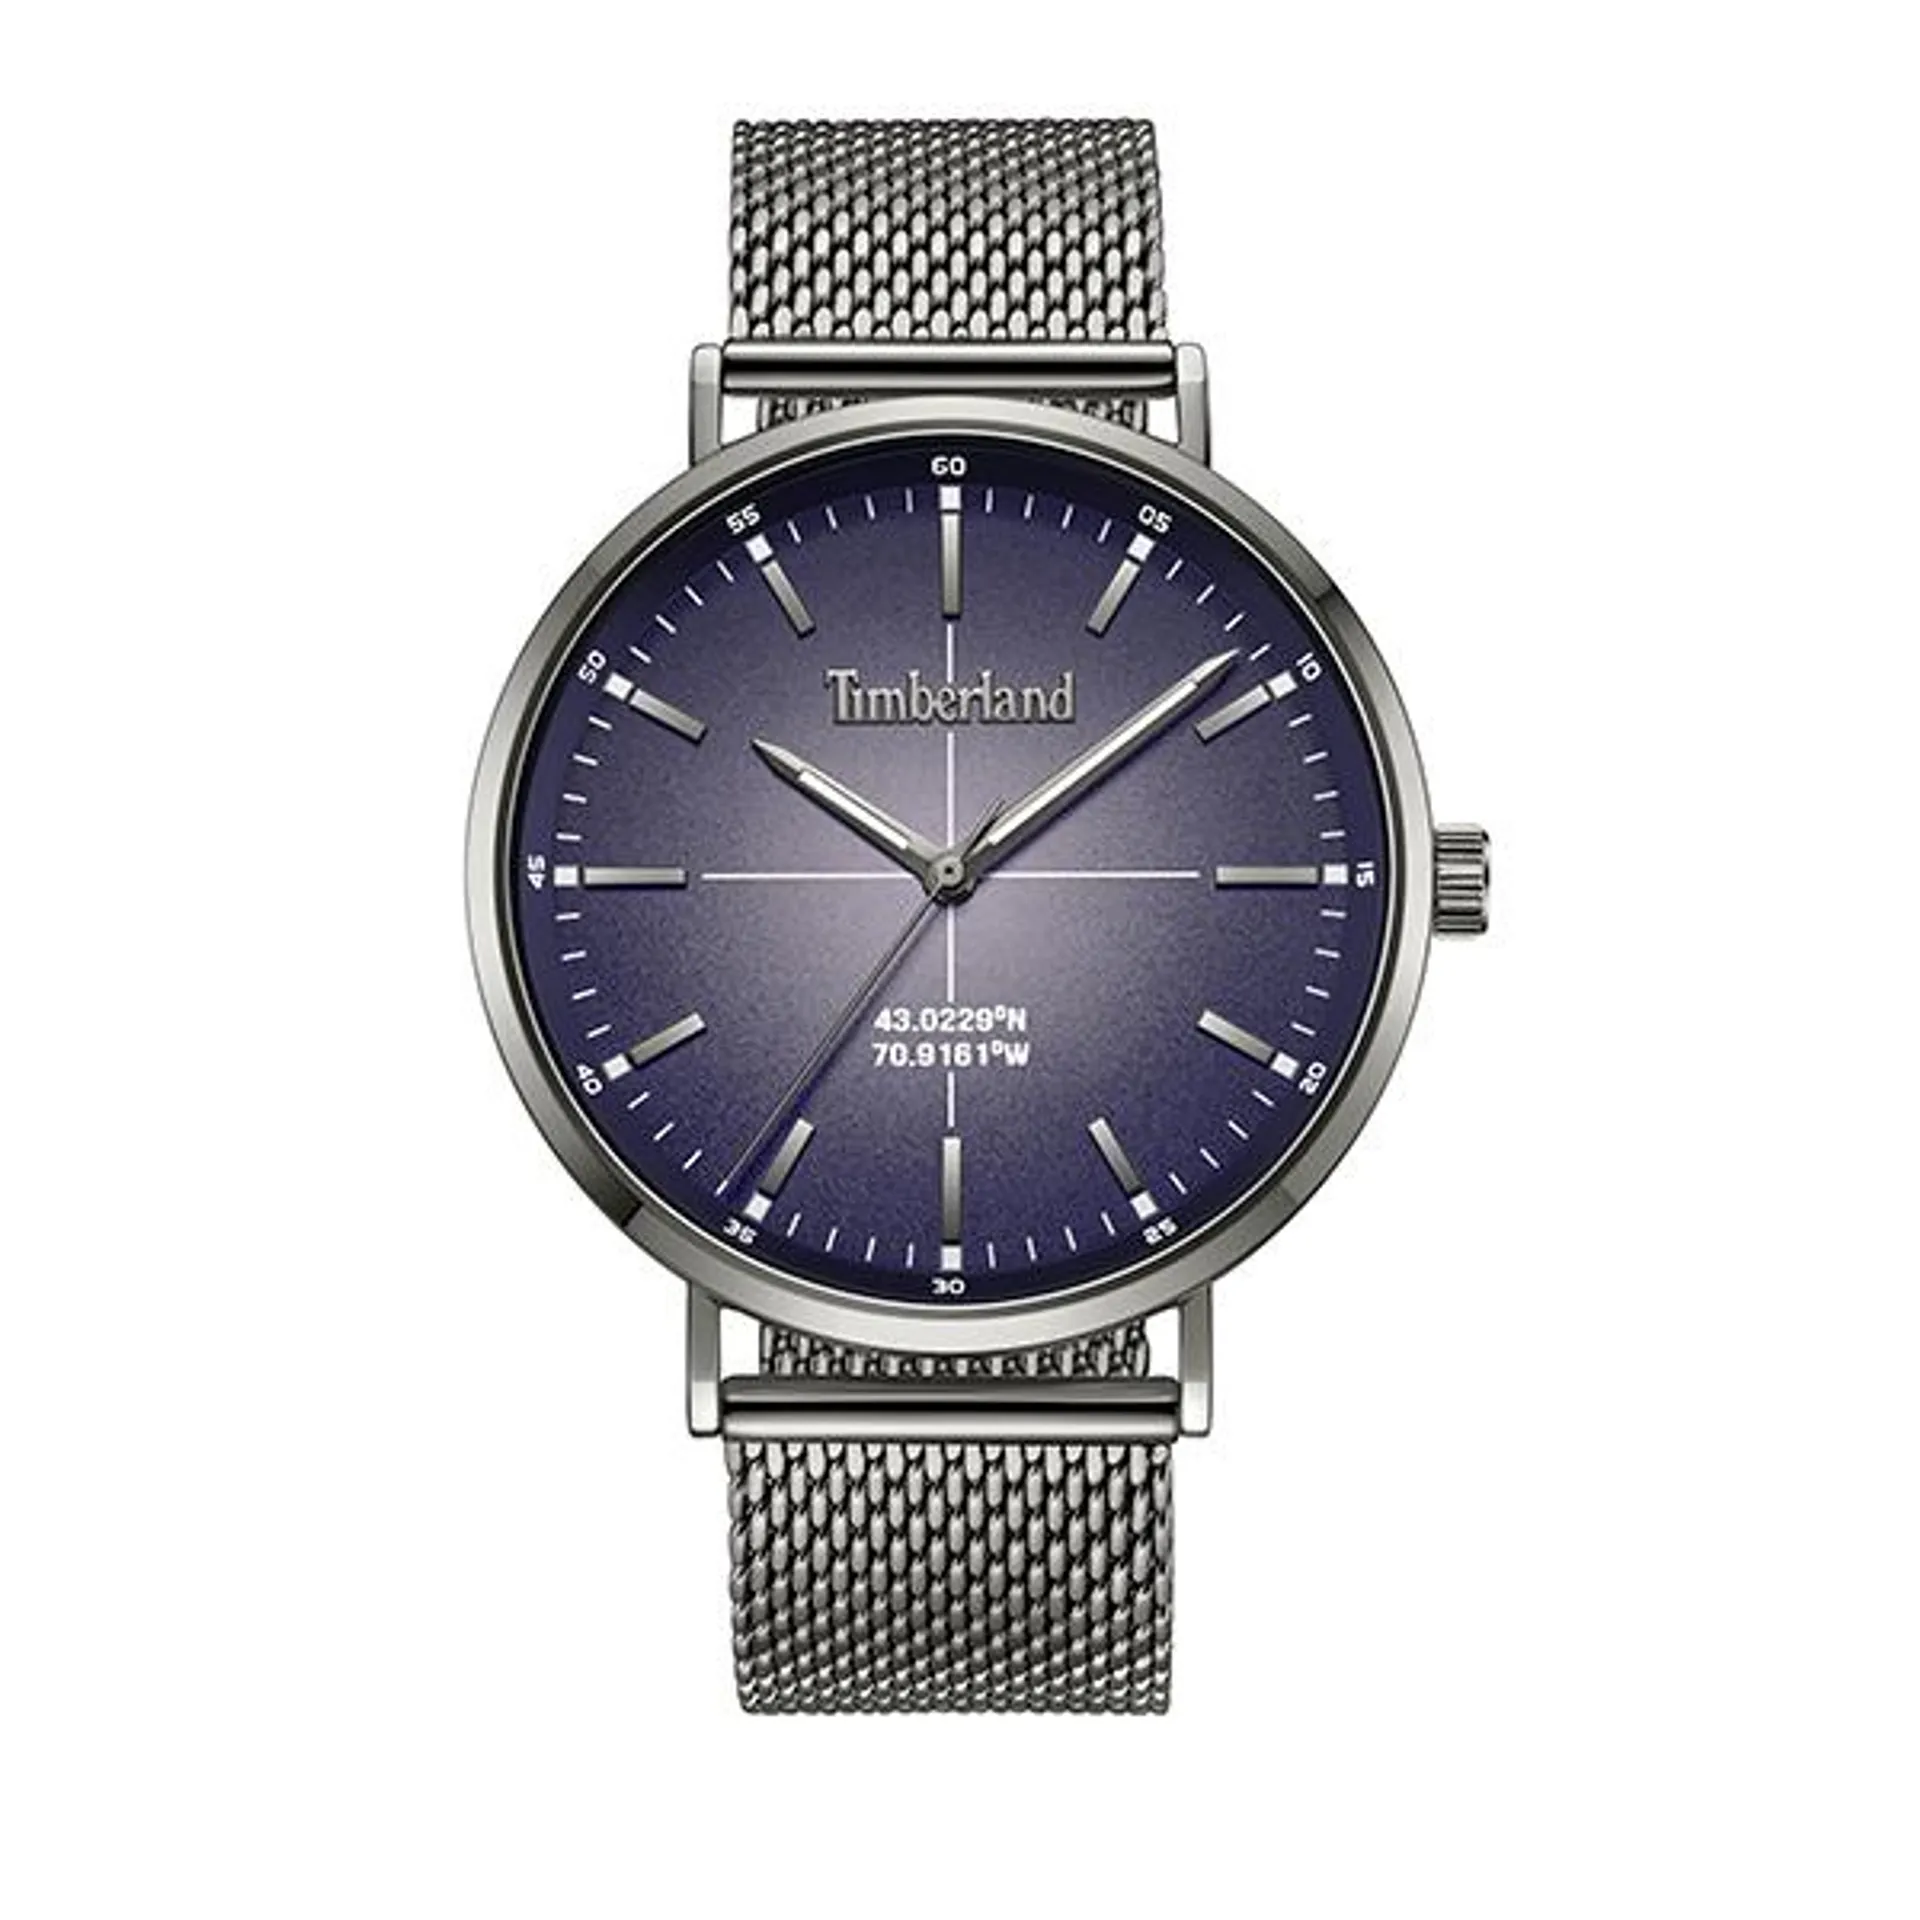 Timberland Gents Rangeley Watch with Mesh Strap